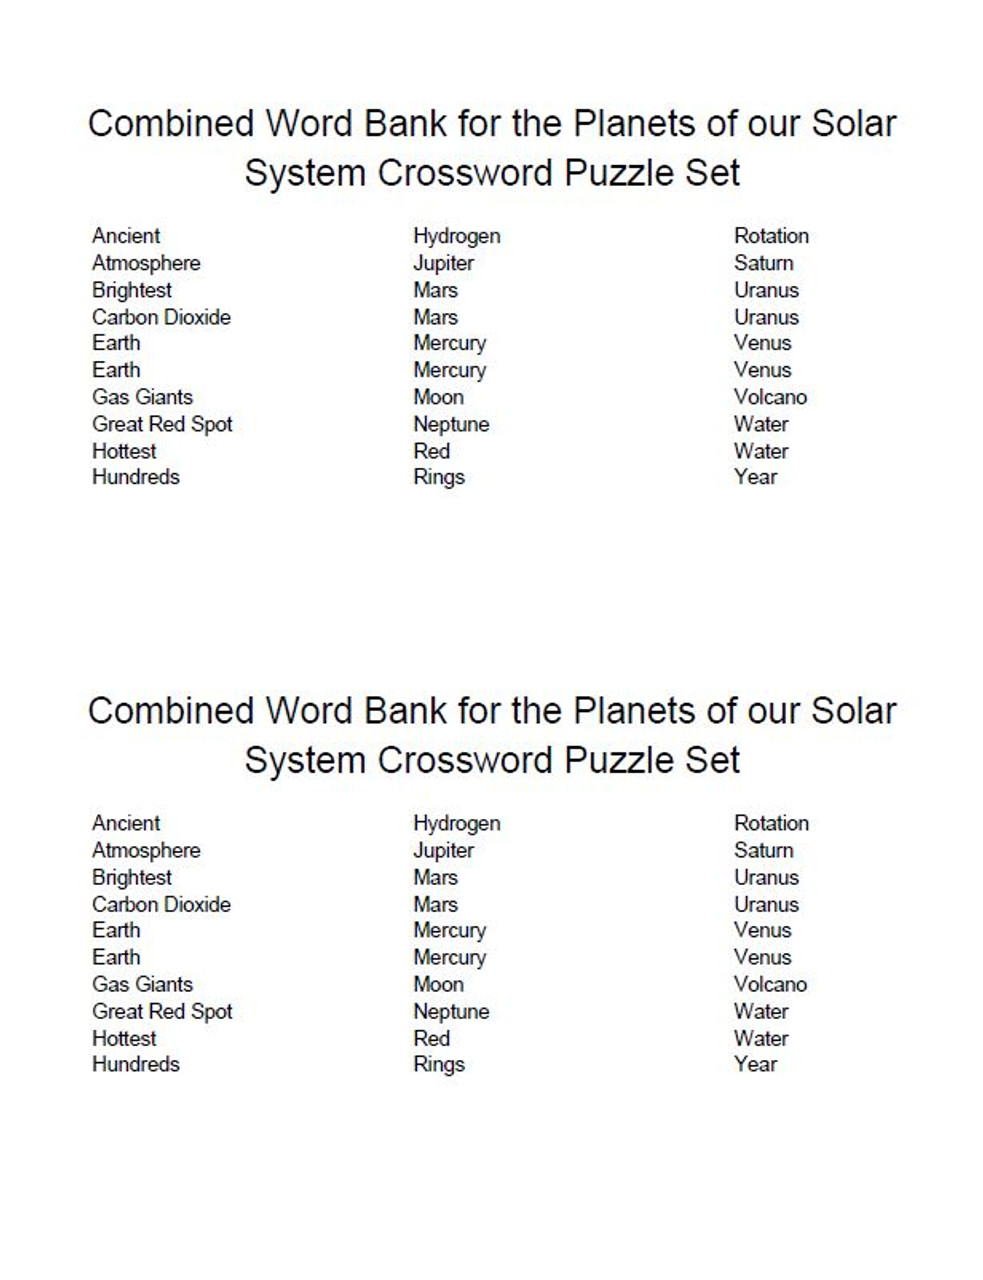 Planets of our Solar System Crossword Puzzle Set